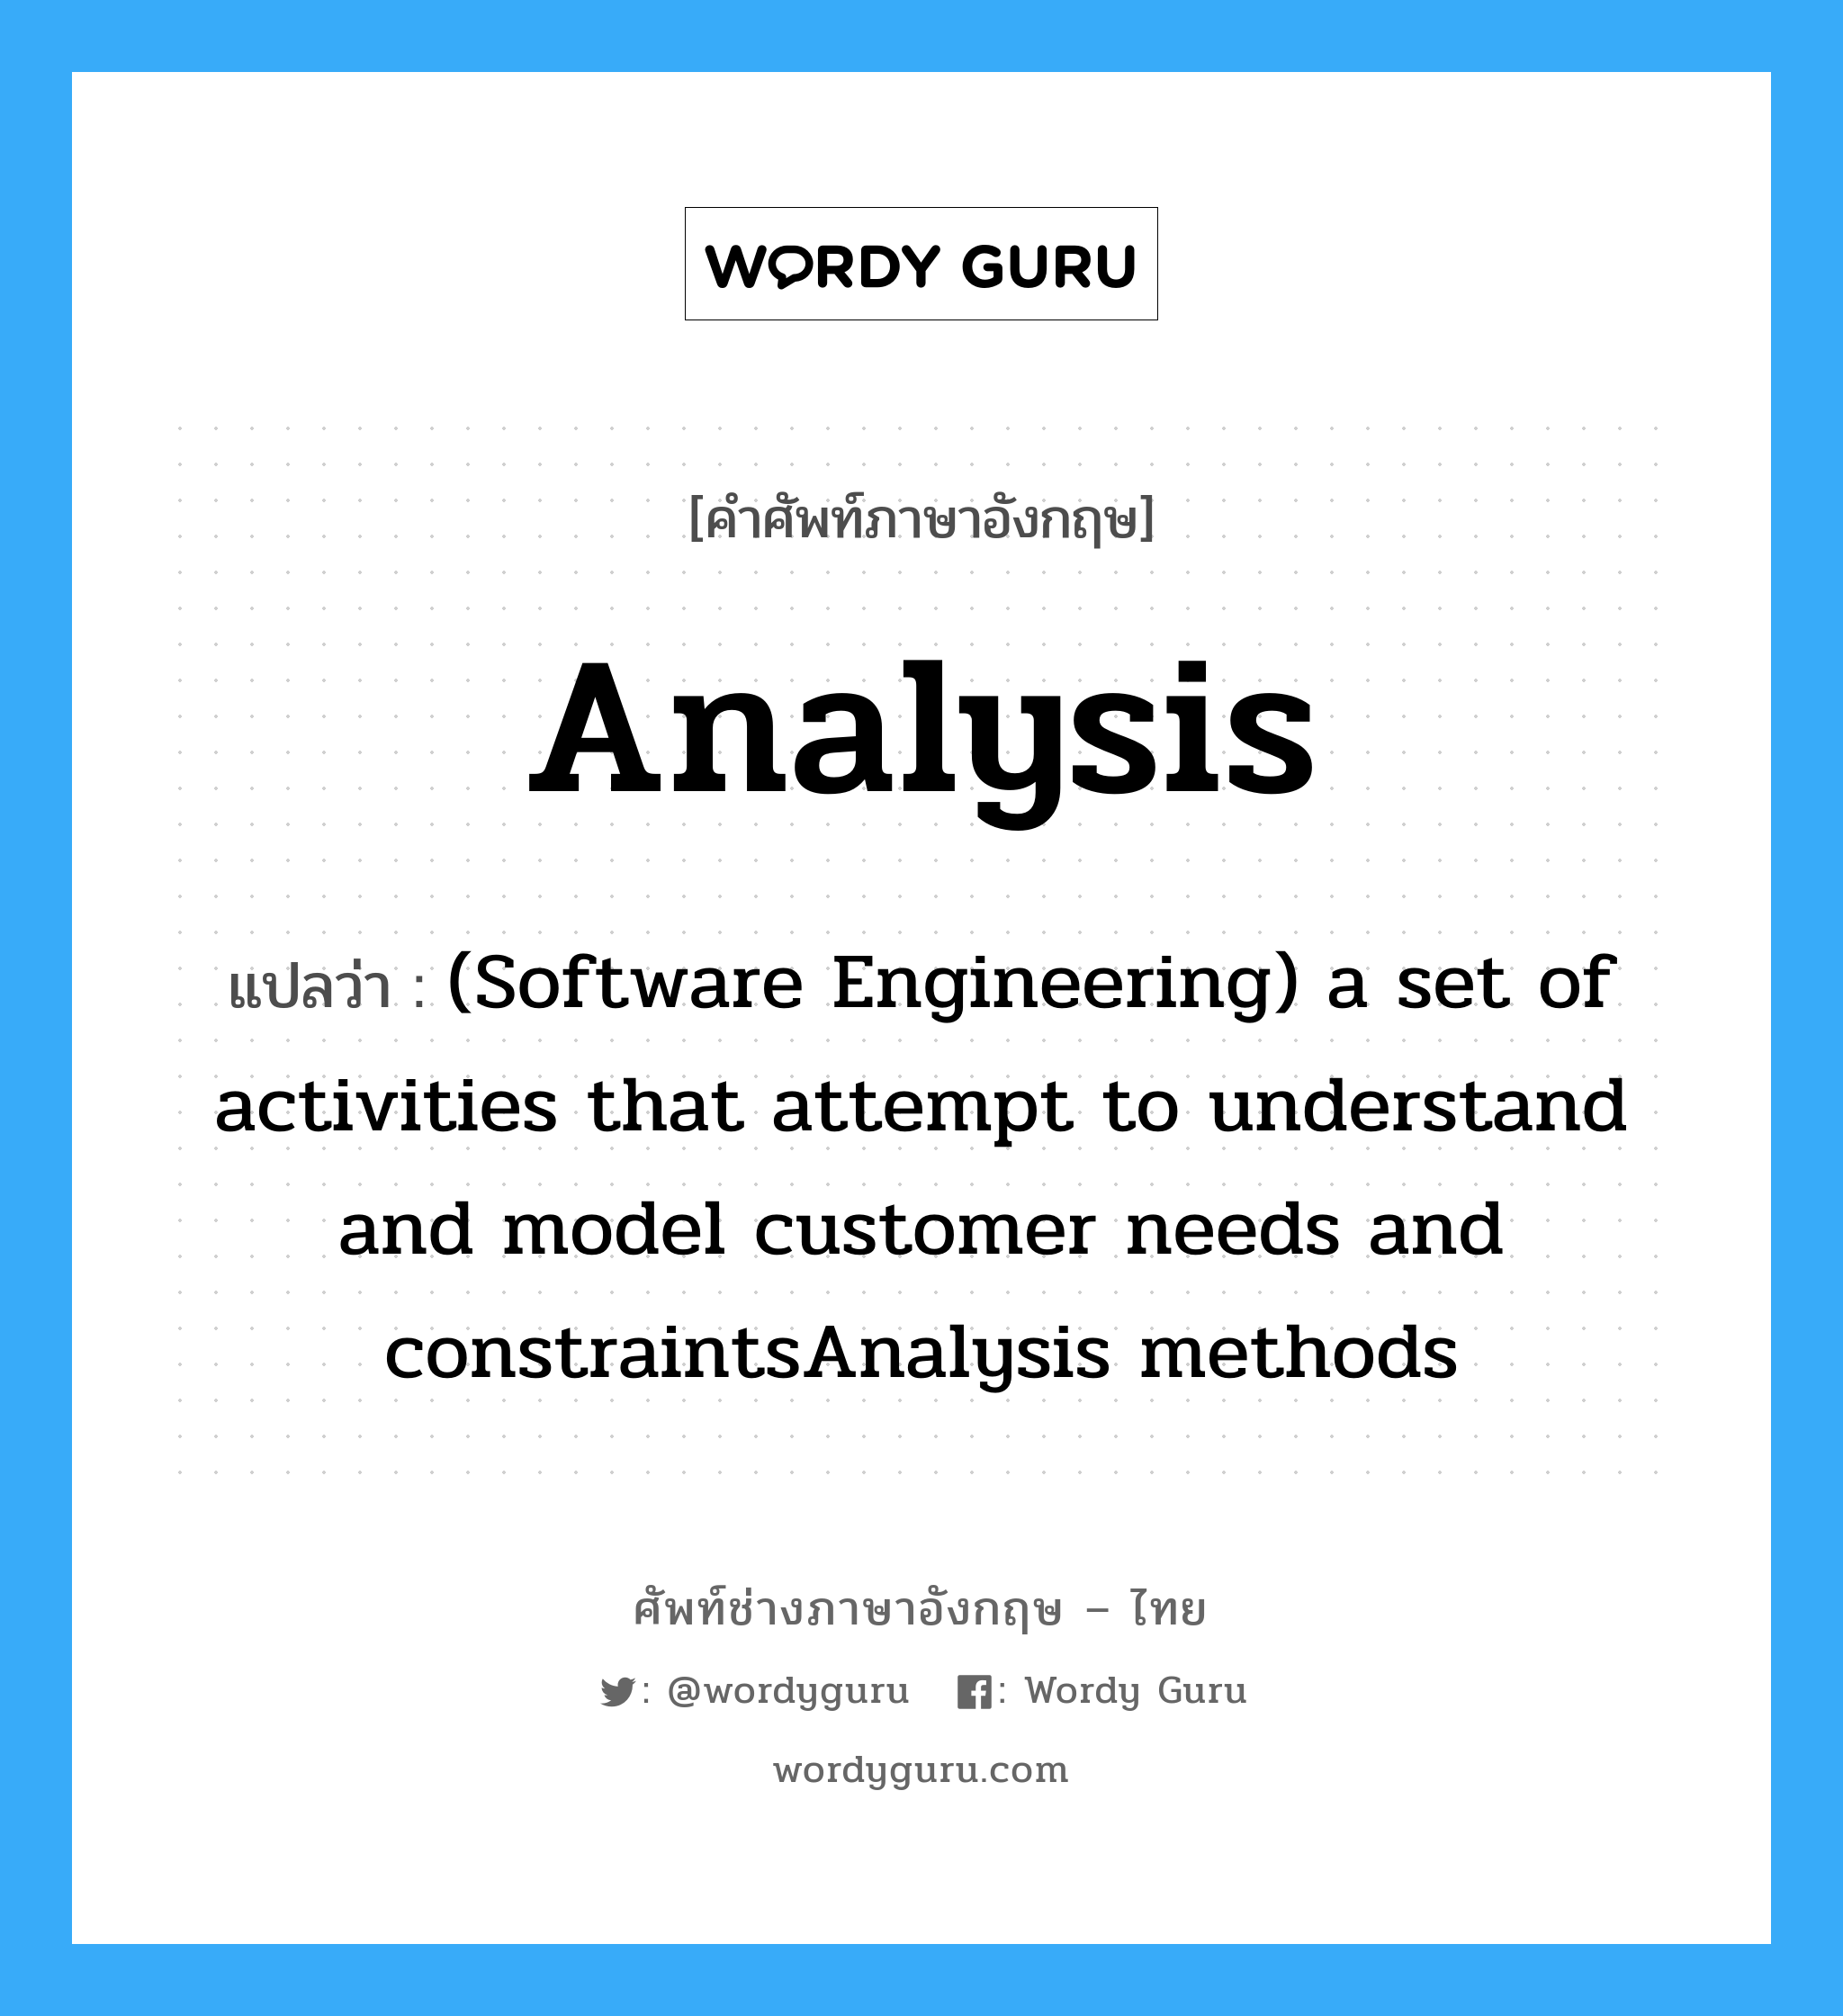 (Software Engineering) a set of activities that attempt to find errors ภาษาอังกฤษ?, คำศัพท์ช่างภาษาอังกฤษ - ไทย (Software Engineering) a set of activities that attempt to understand and model customer needs and constraintsAnalysis methods คำศัพท์ภาษาอังกฤษ (Software Engineering) a set of activities that attempt to understand and model customer needs and constraintsAnalysis methods แปลว่า Analysis